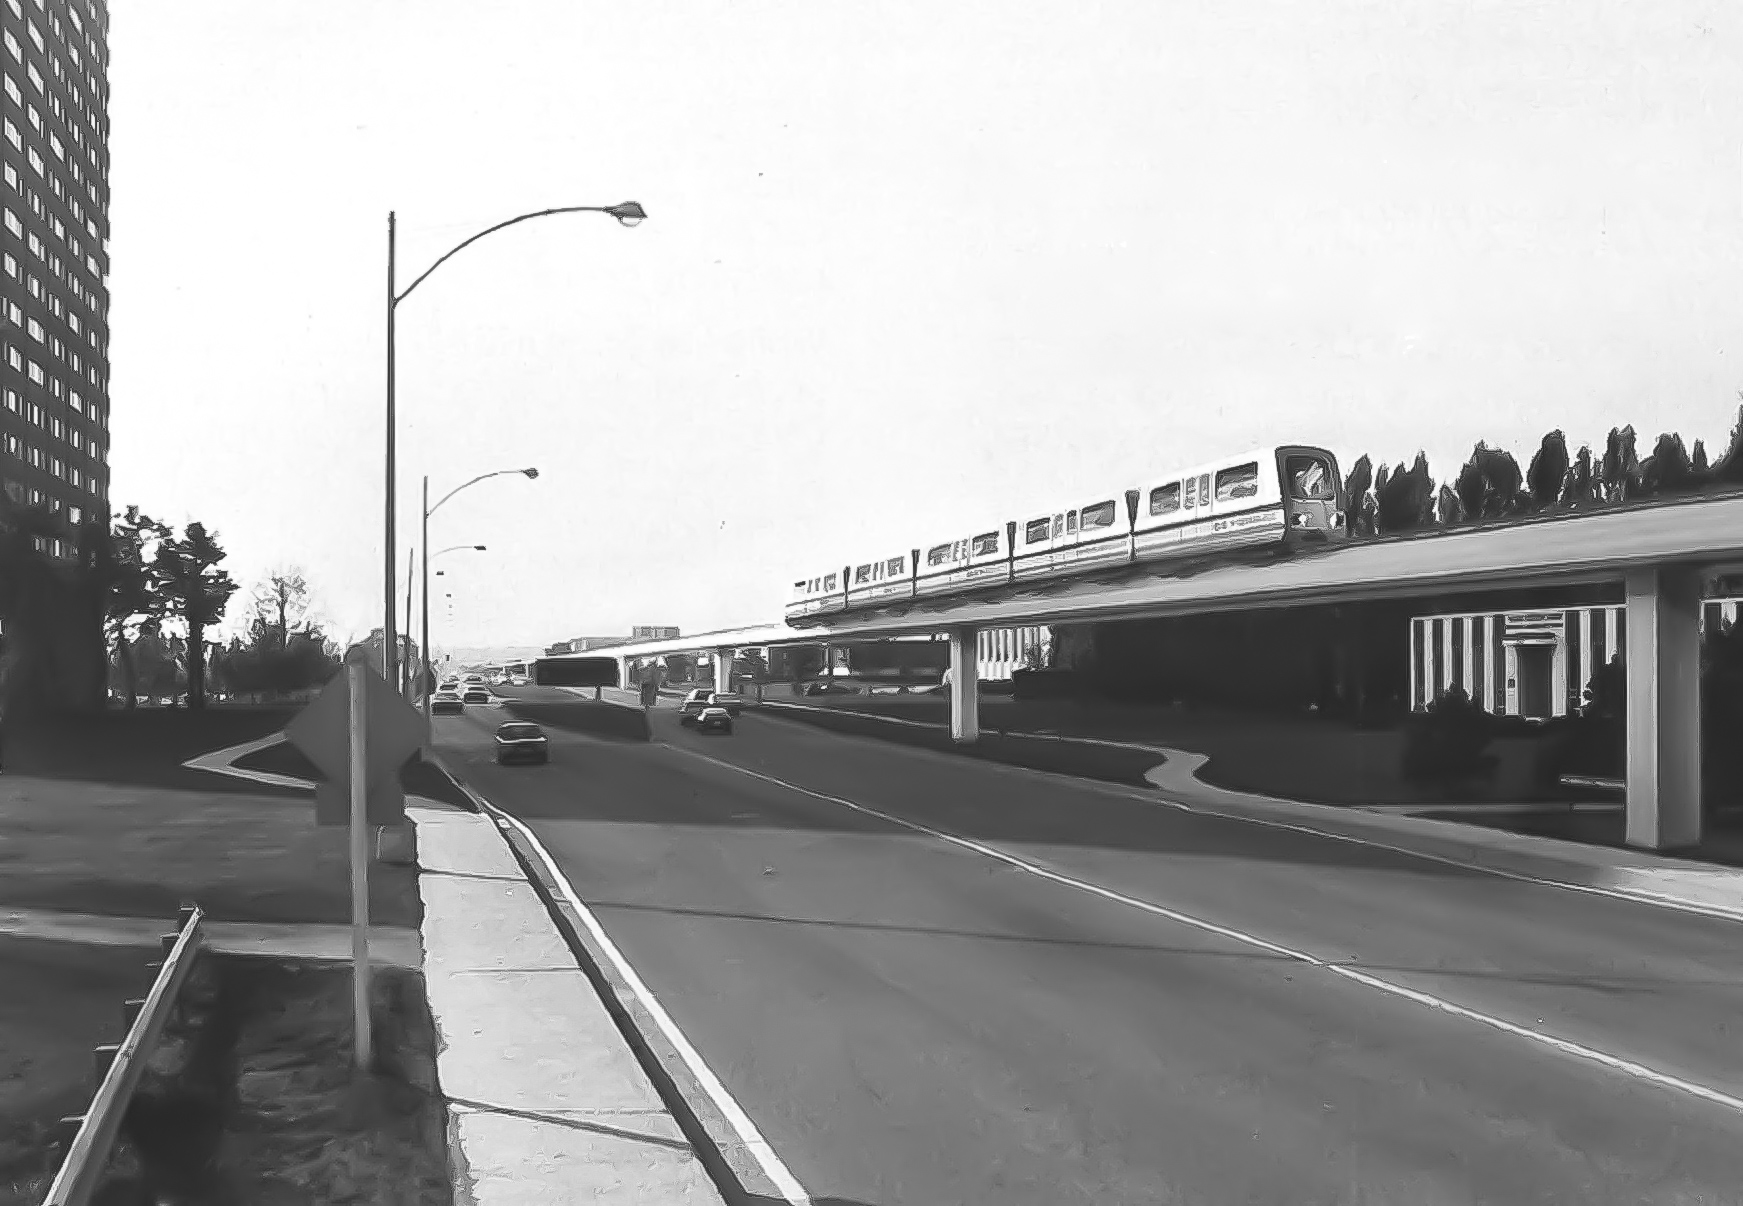 This image shows the proposed GO-Urban system running elevated along a street.